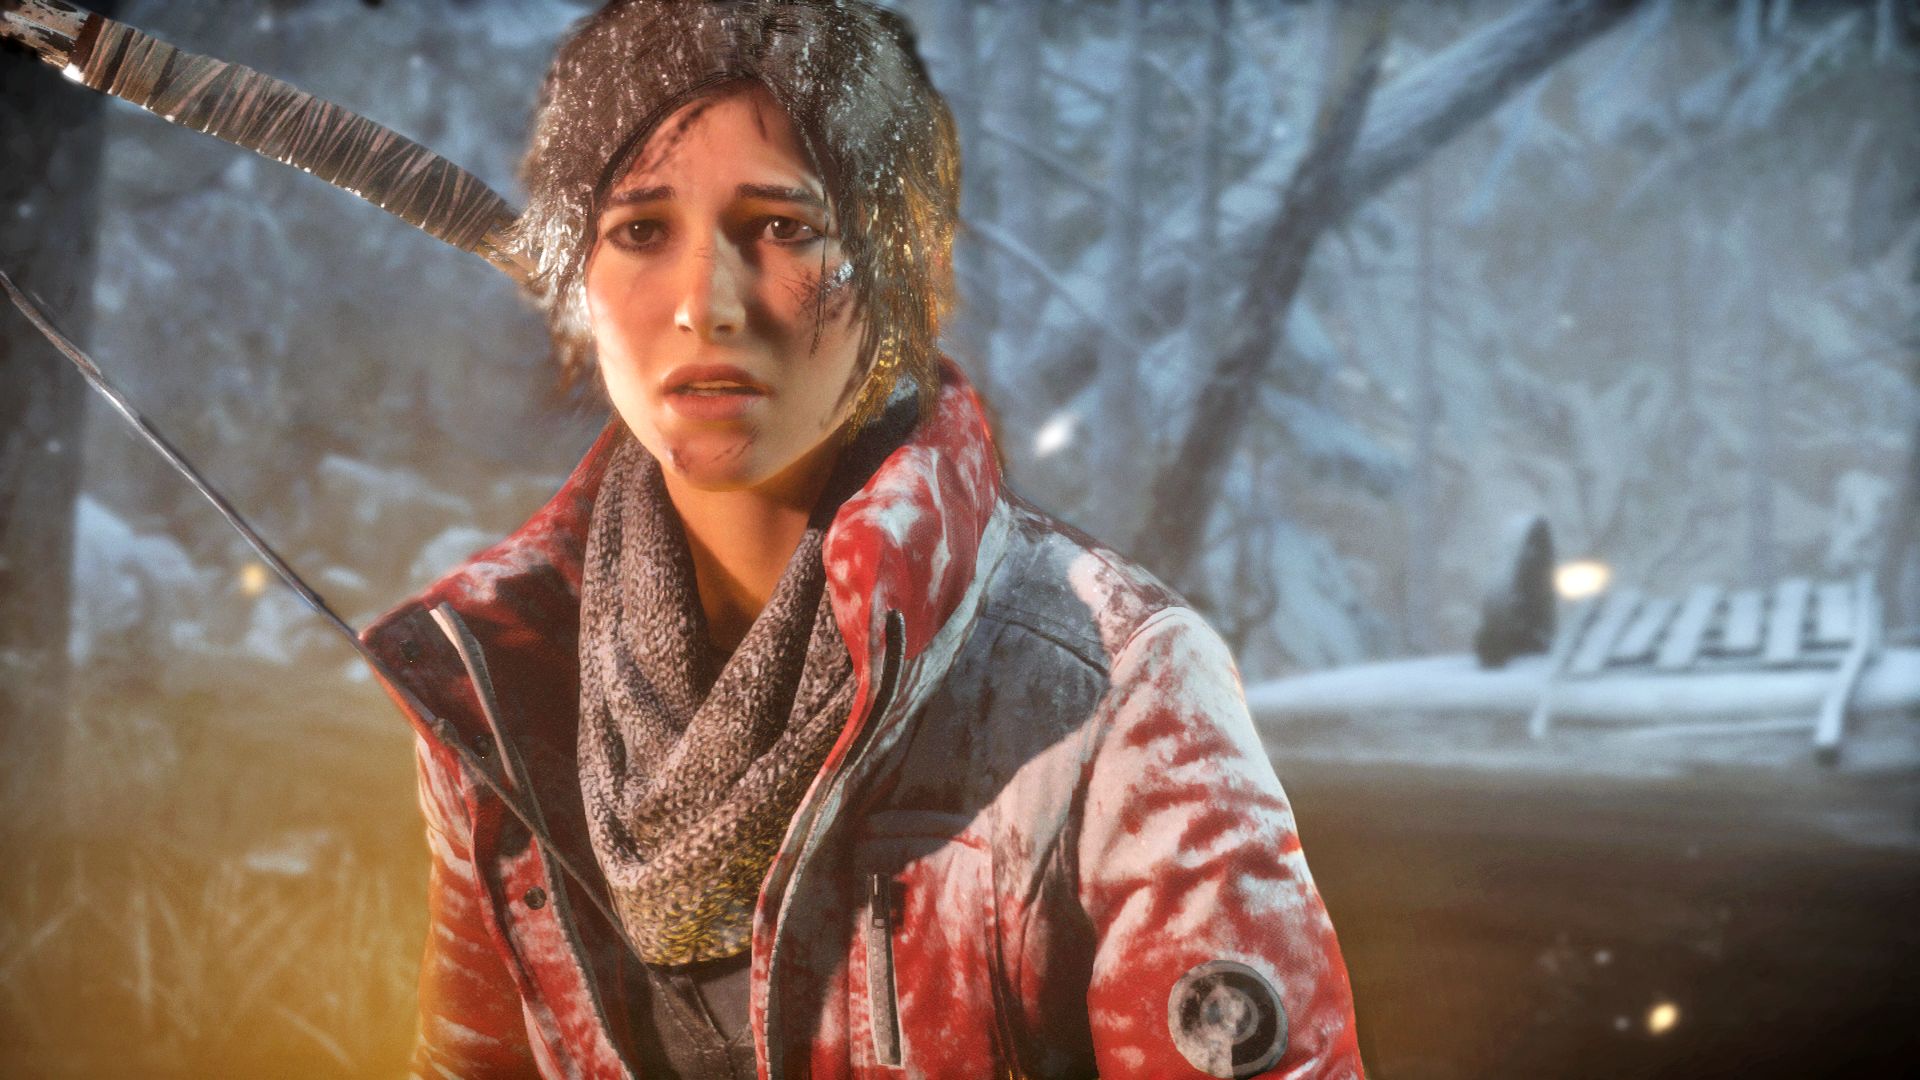 Further Evidence for “Tomb Raider” PC Version Coming Jan. 2016